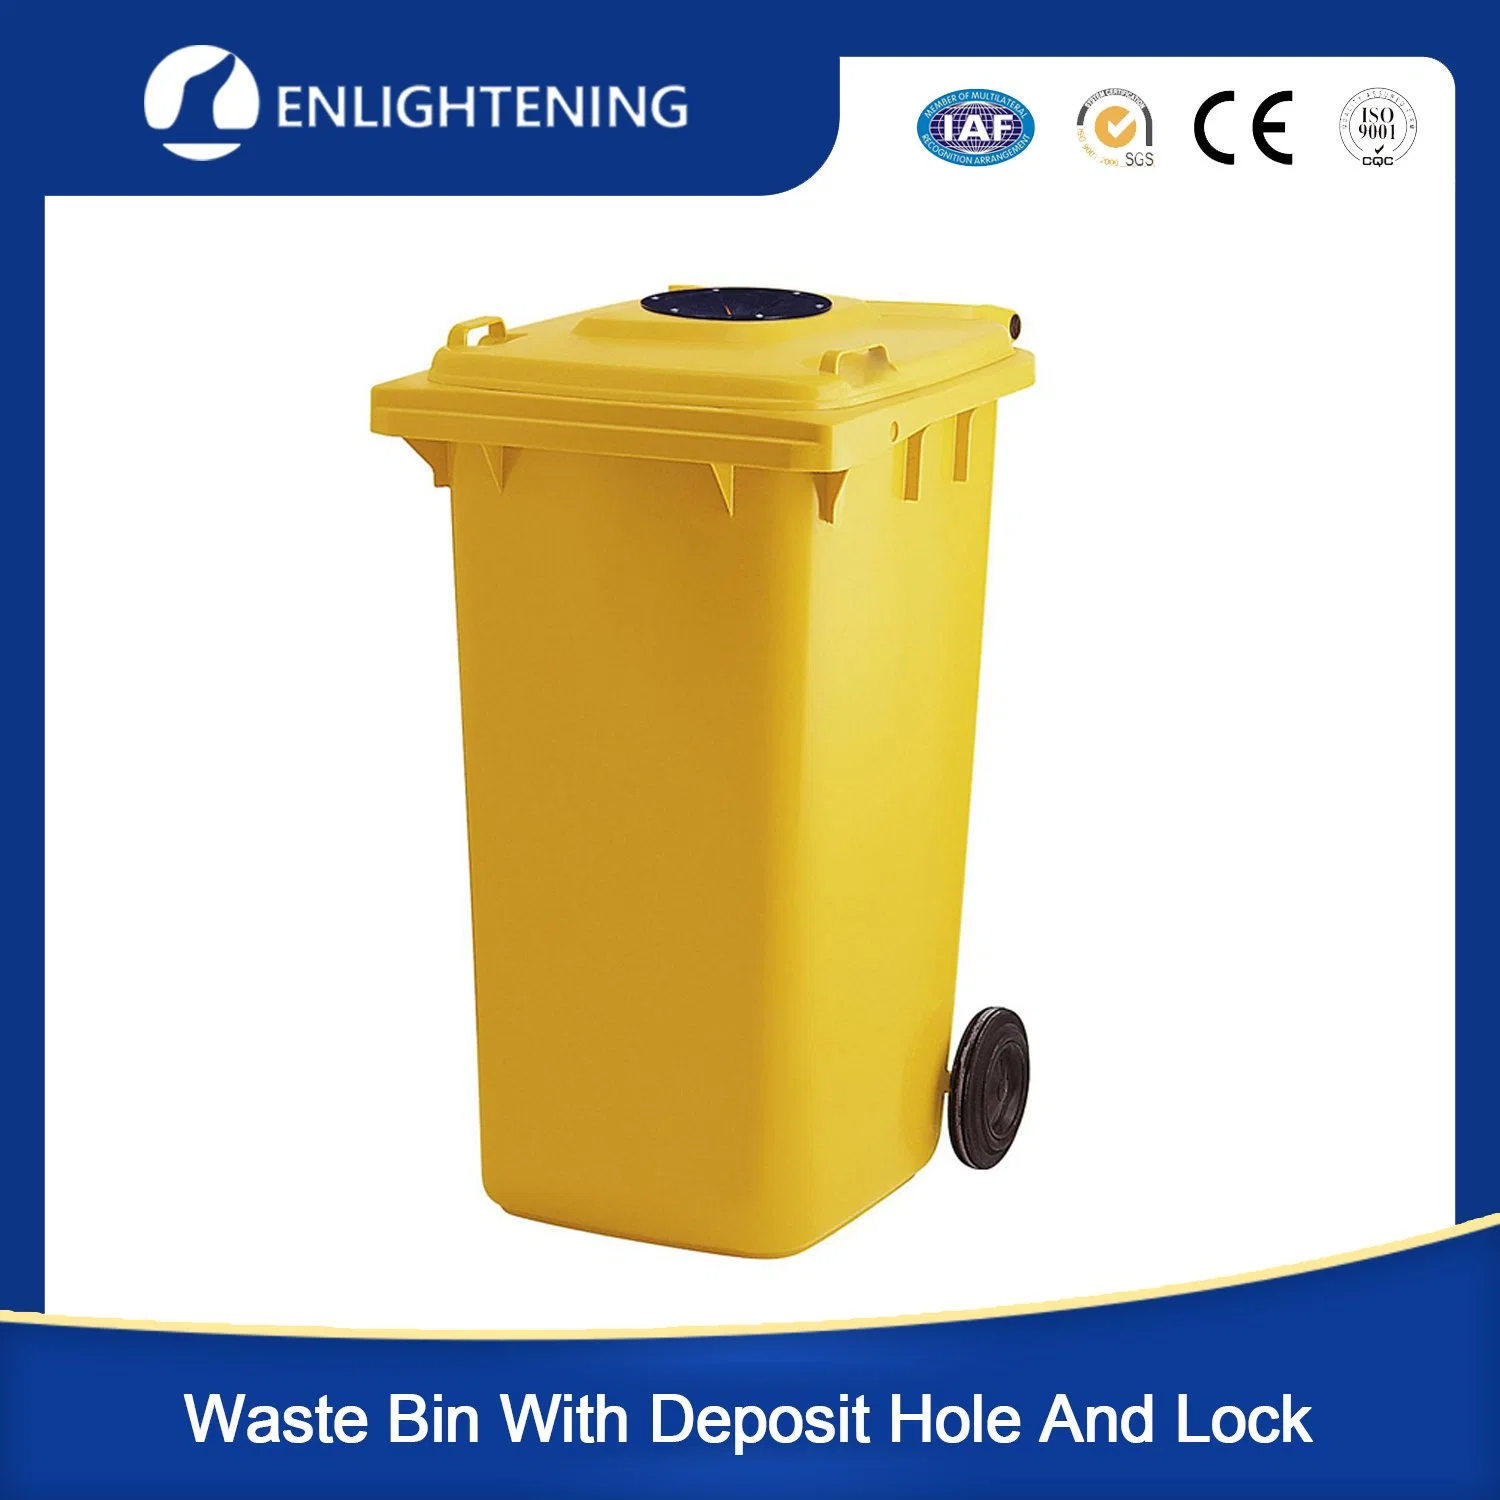 Outdoor Dumpster Garbage Bin Industrial Plastic Waste Bin Container Recycle Dustbin with Rubber Hole and Lock